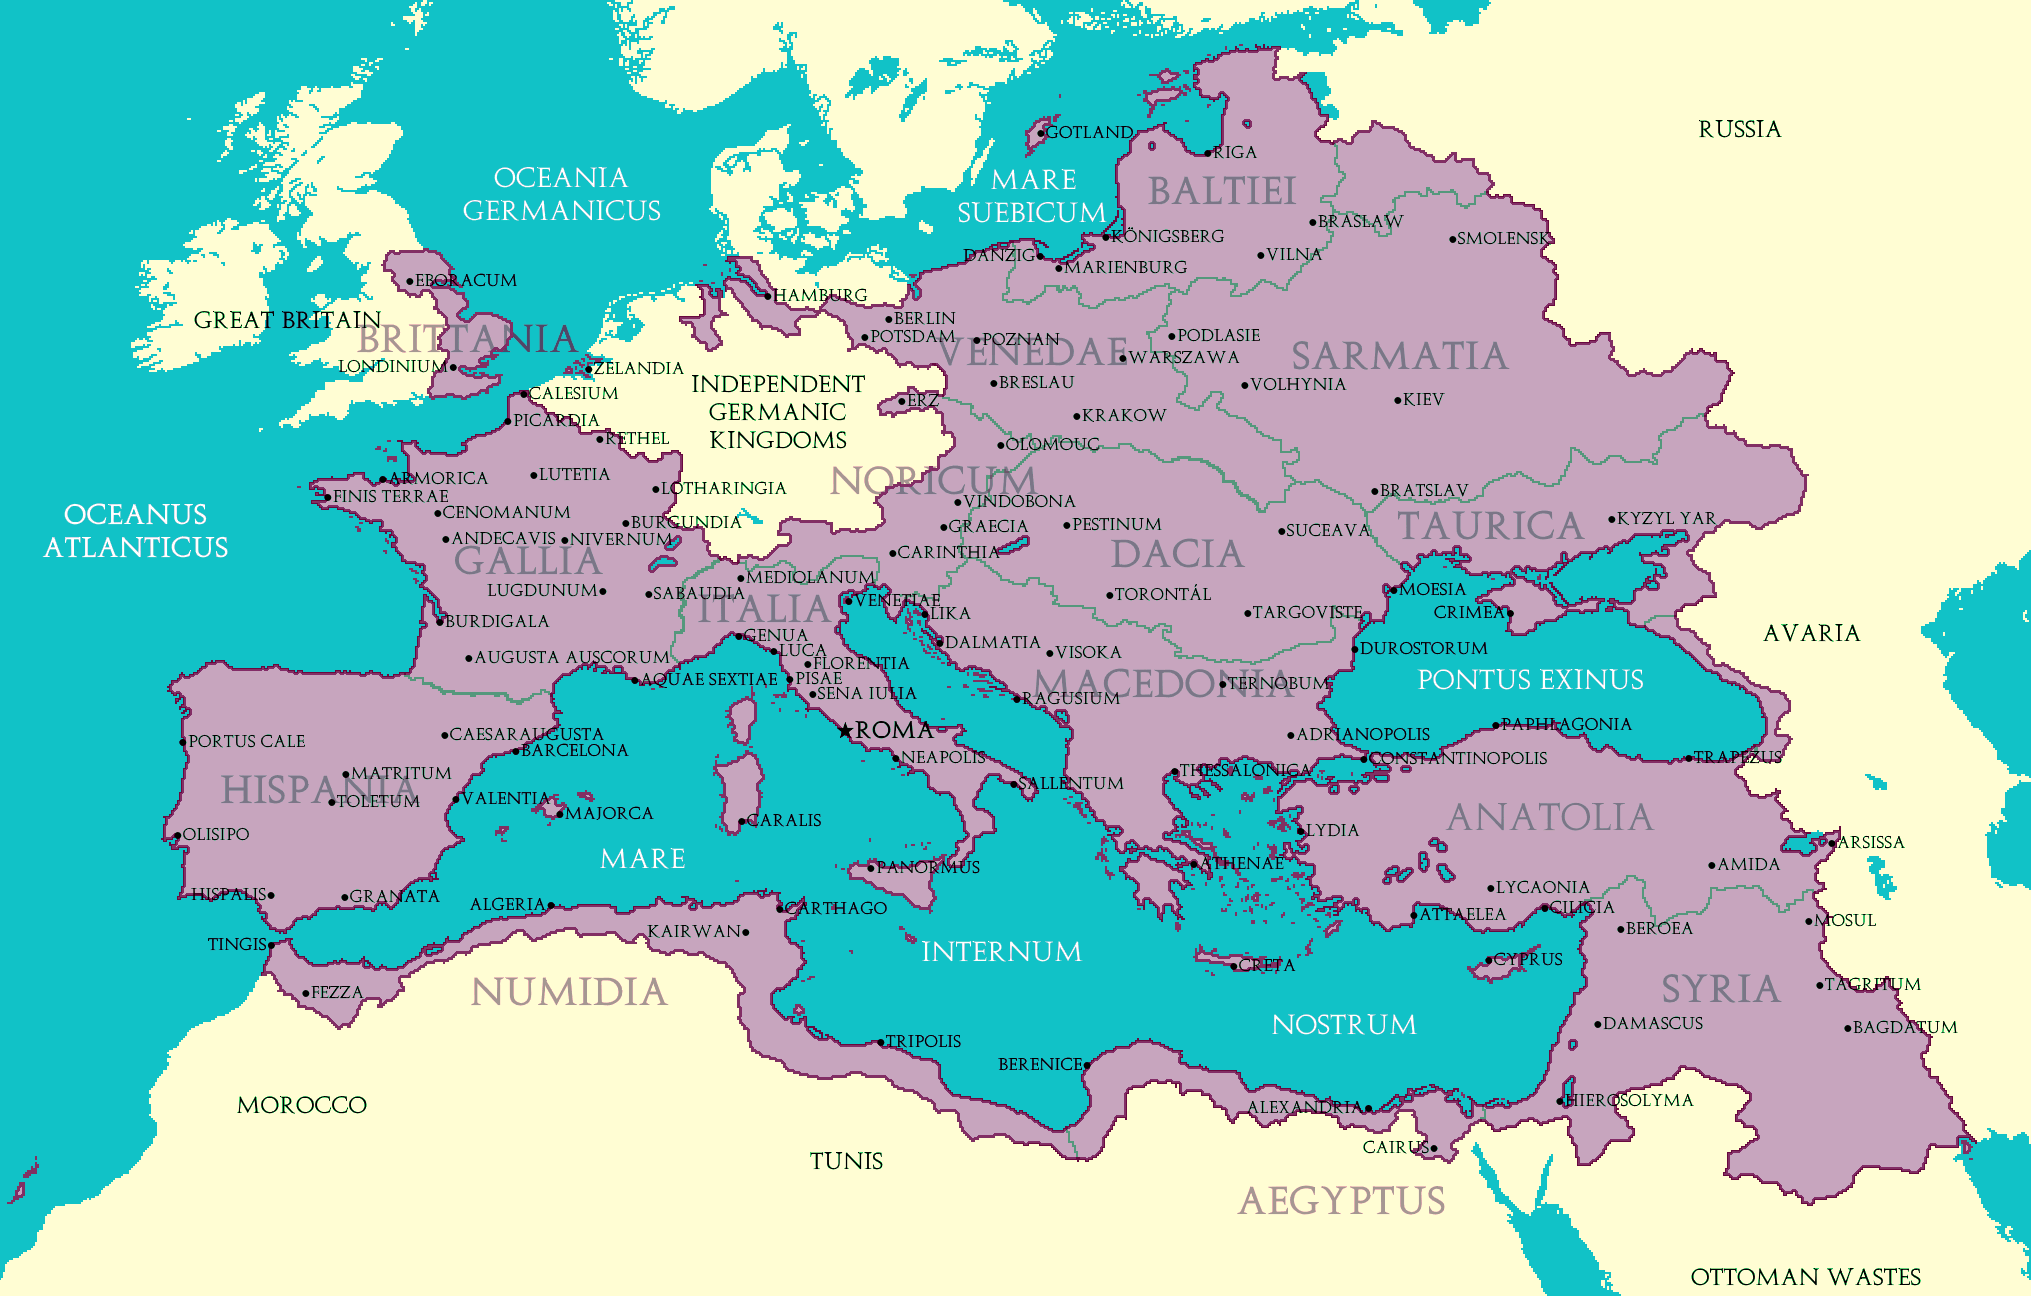 Map of the Mediterranean Sea from Roman times